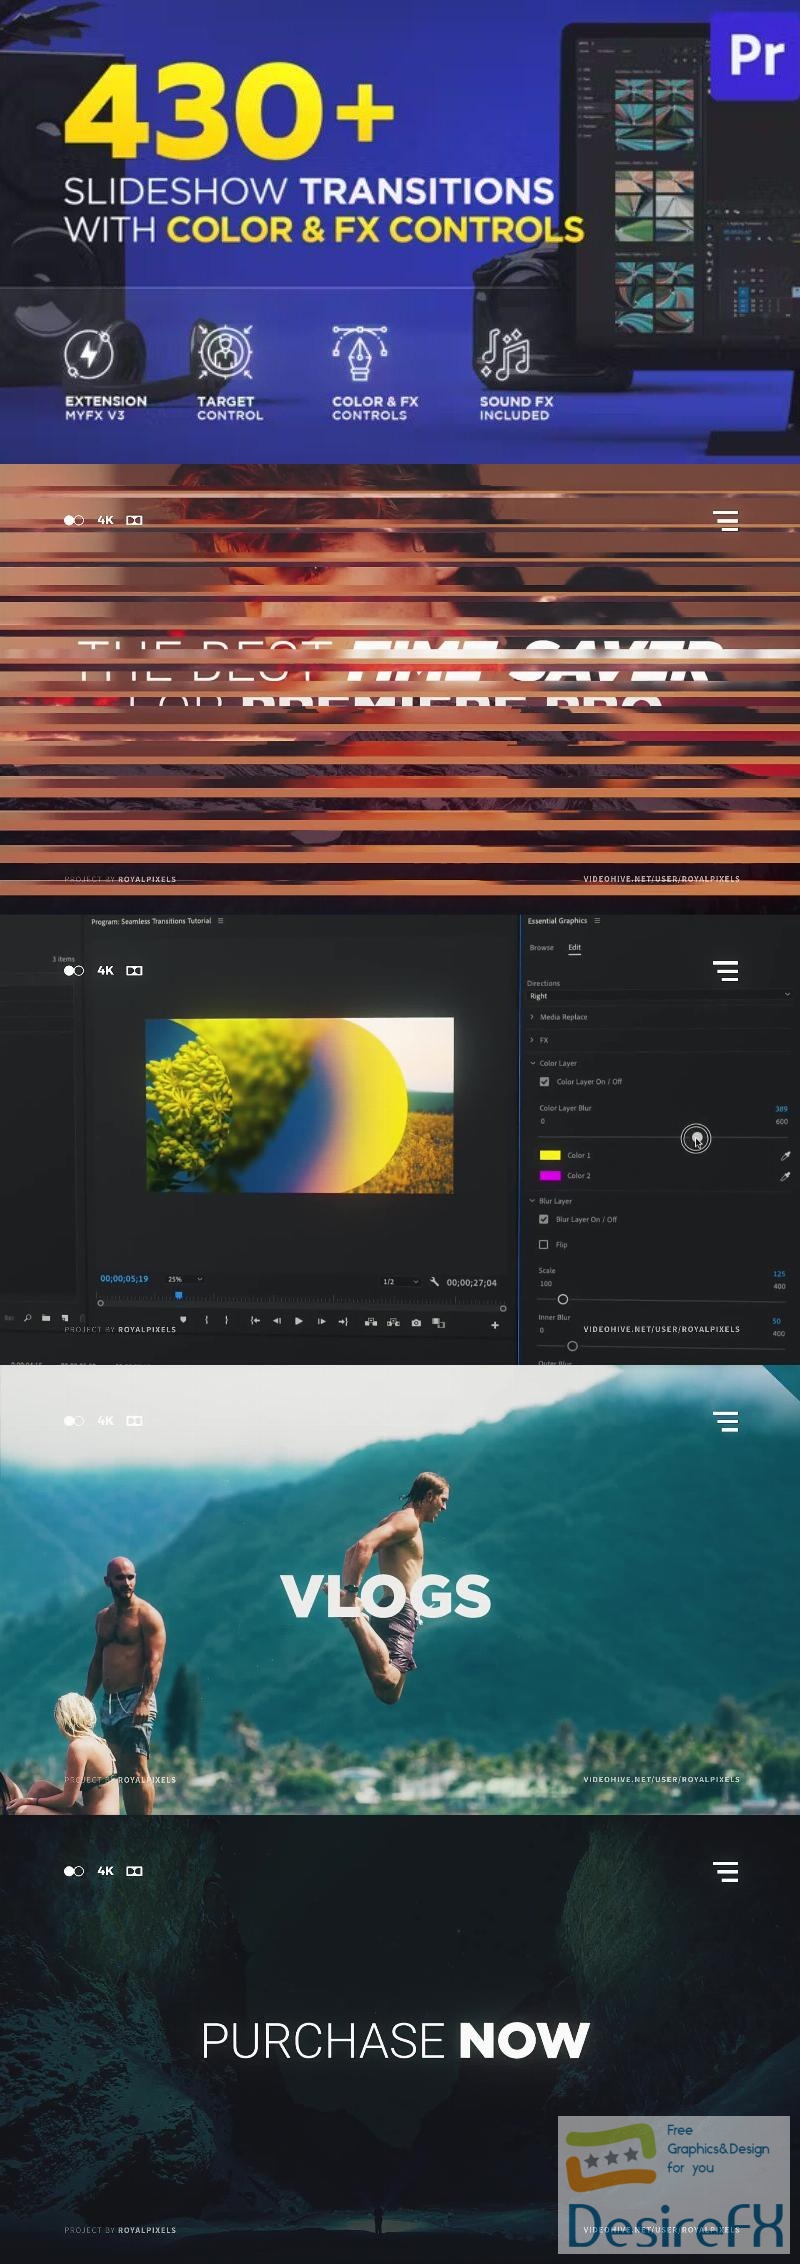 Videohive Slideshow Transitions for Premiere Pro 39809411